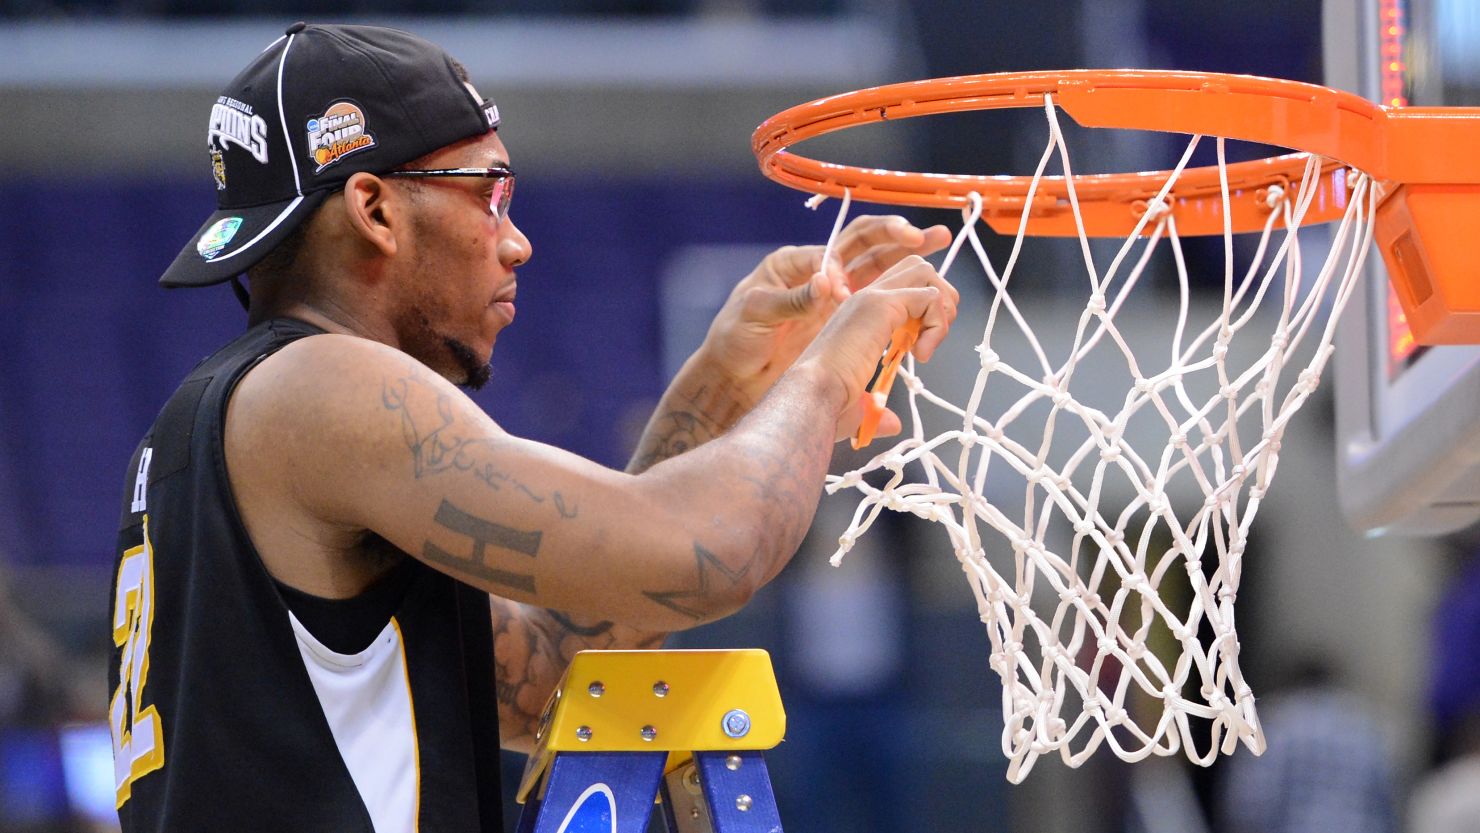 Wichita State's Carl Hall cuts down the net at Los Angeles' Staples Center after an upset win over Ohio State. 